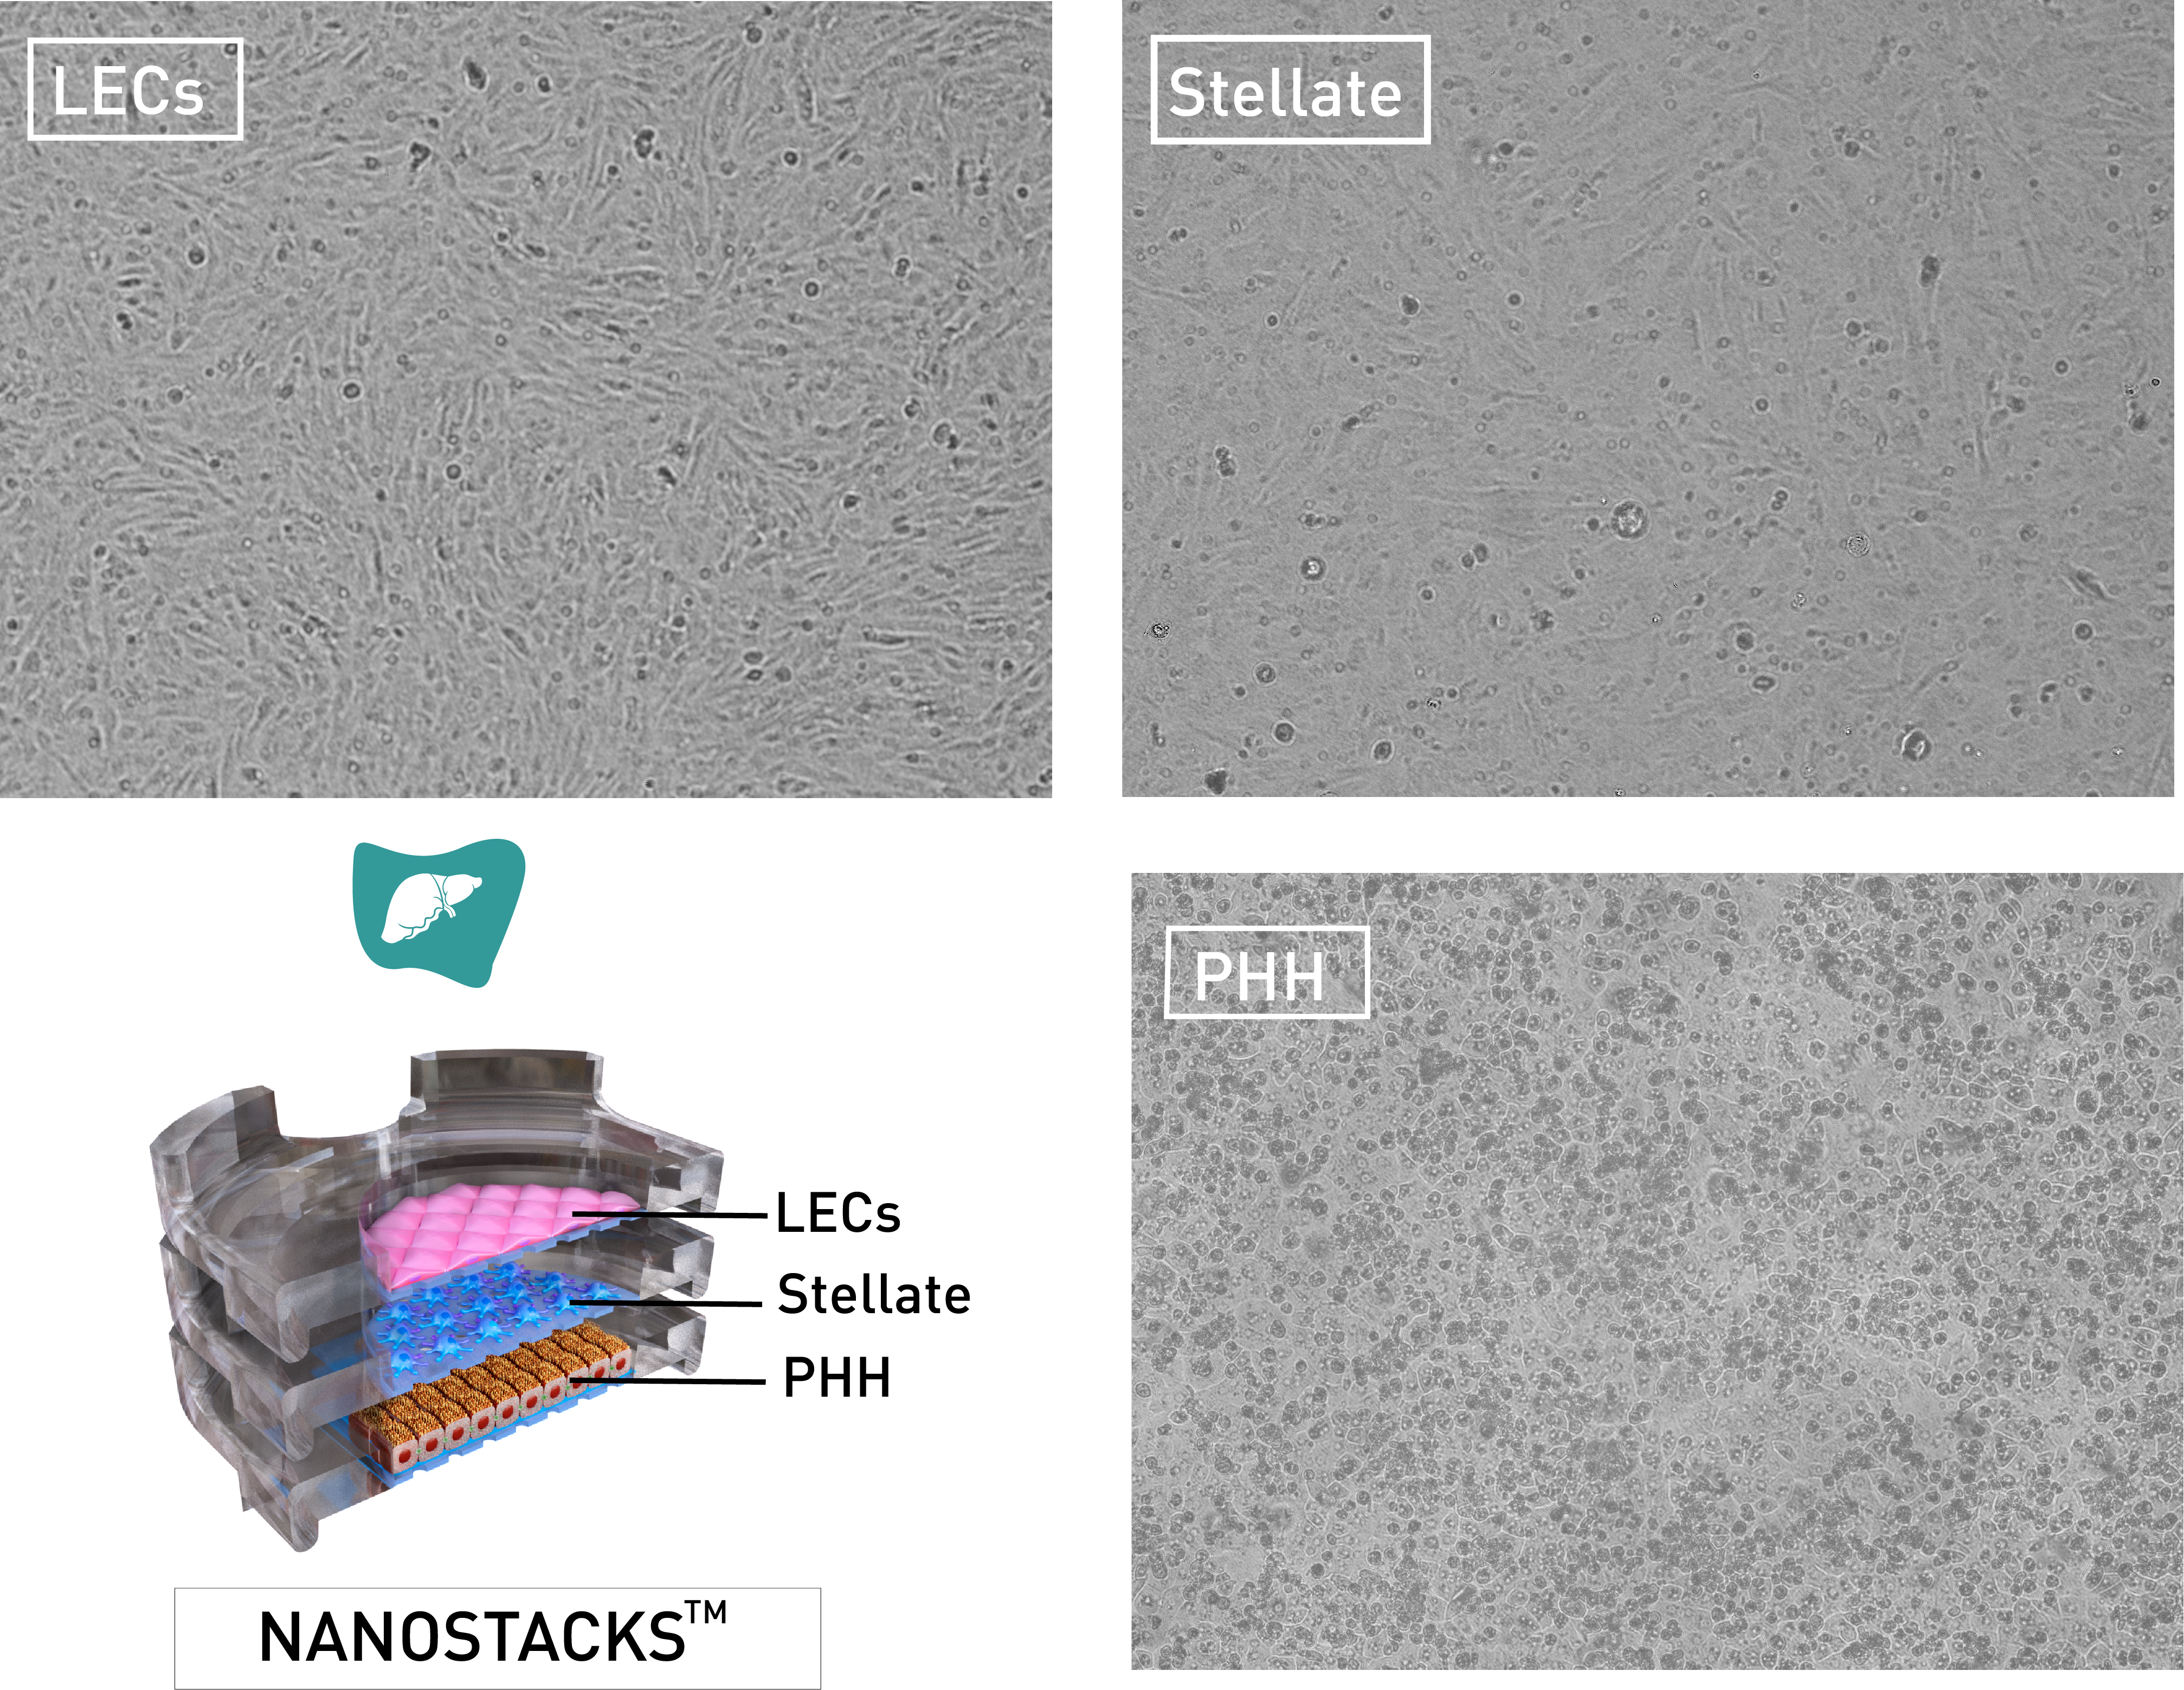 tri culture cells on nanostacks wildfield cell images on nanostacks2.png__PID:133f9ac1-69fb-4671-9238-3ab72974a8d0